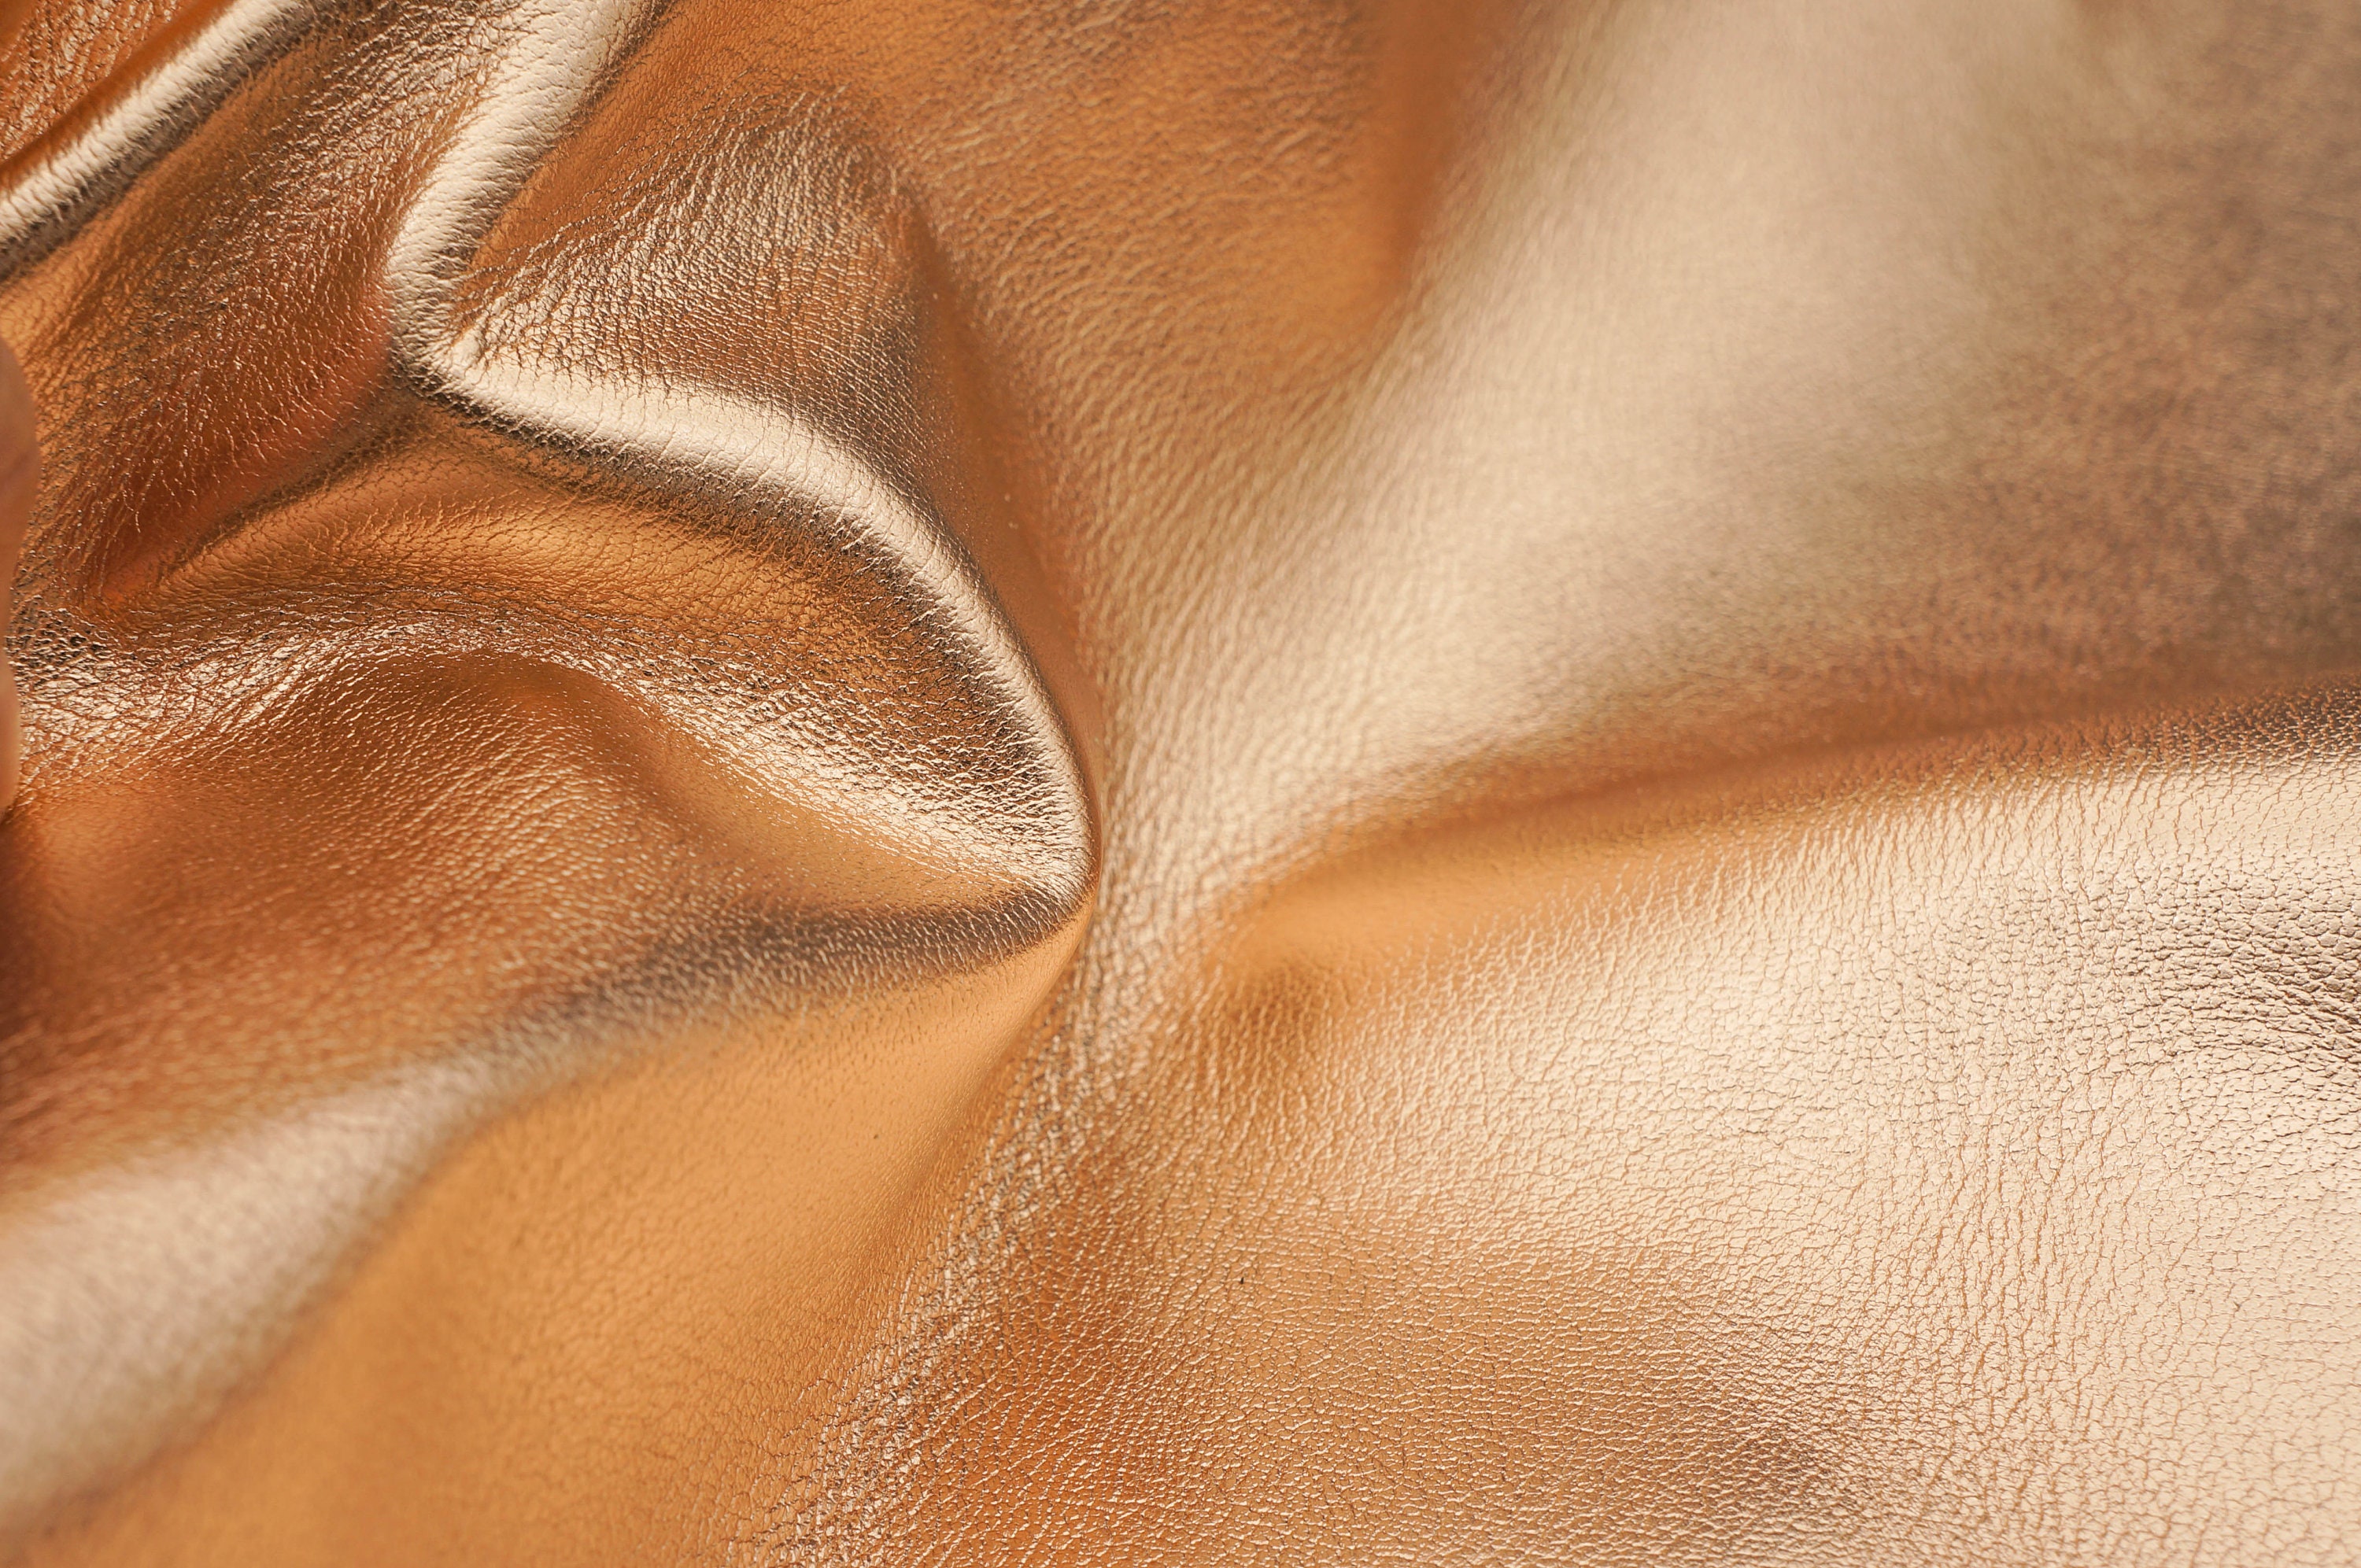 Self-Adhesive Leather Fabric, Artificial Leather, Faux Leather